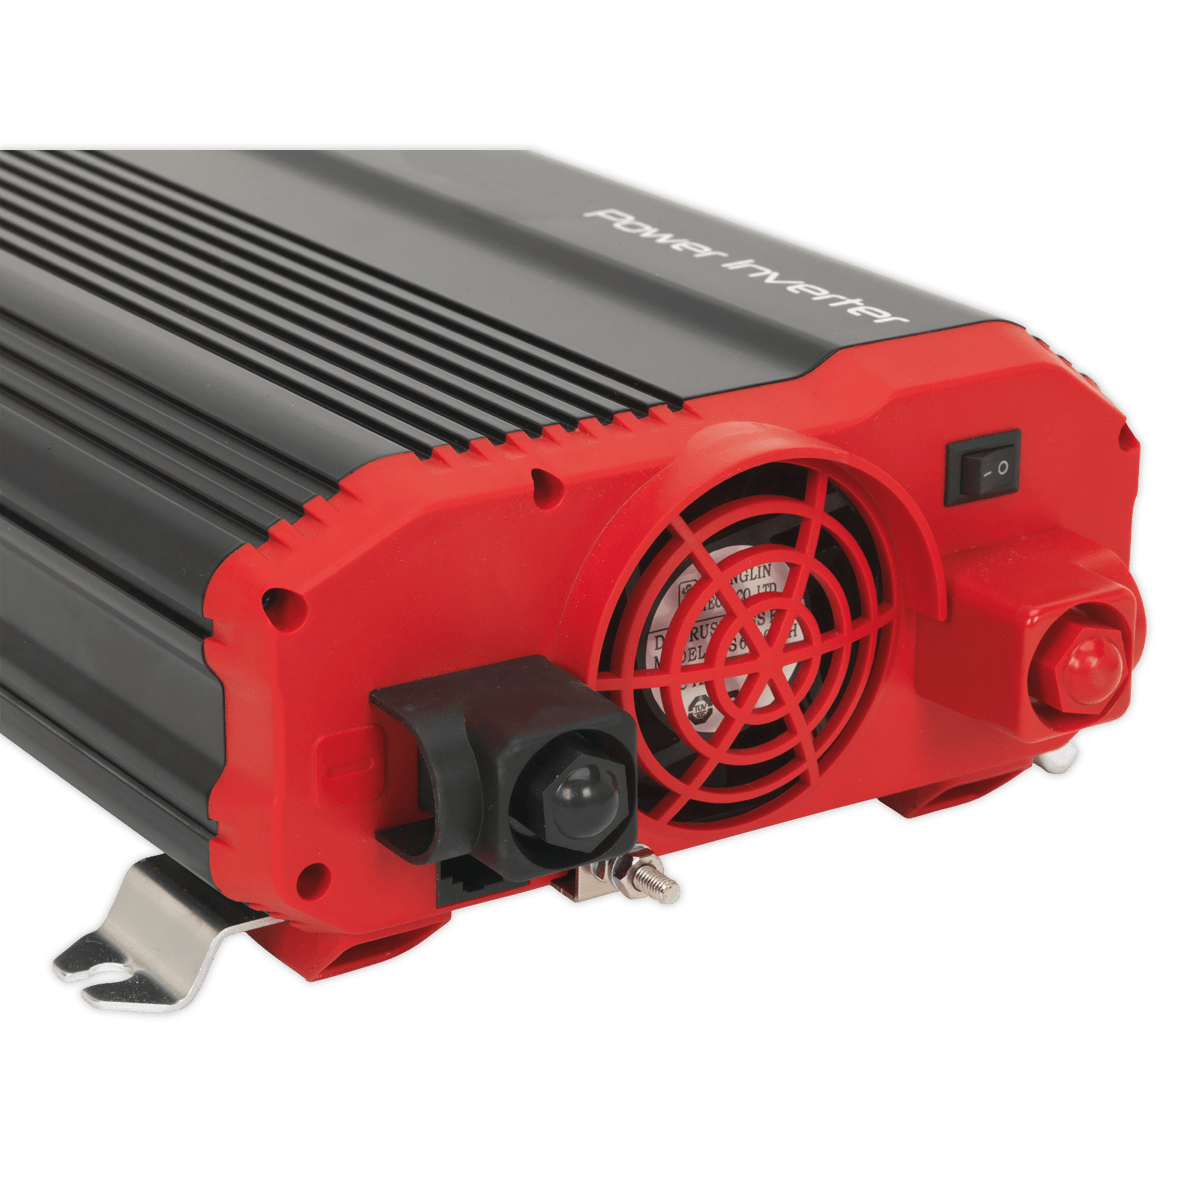 Power Inverter Modified Sine Wave 1100W 12V DC - 230V~50Hz | Supplies continuous smooth 230V power from 12V DC power supply found in cars, caravans, boats and commercials. | toolforce.ie